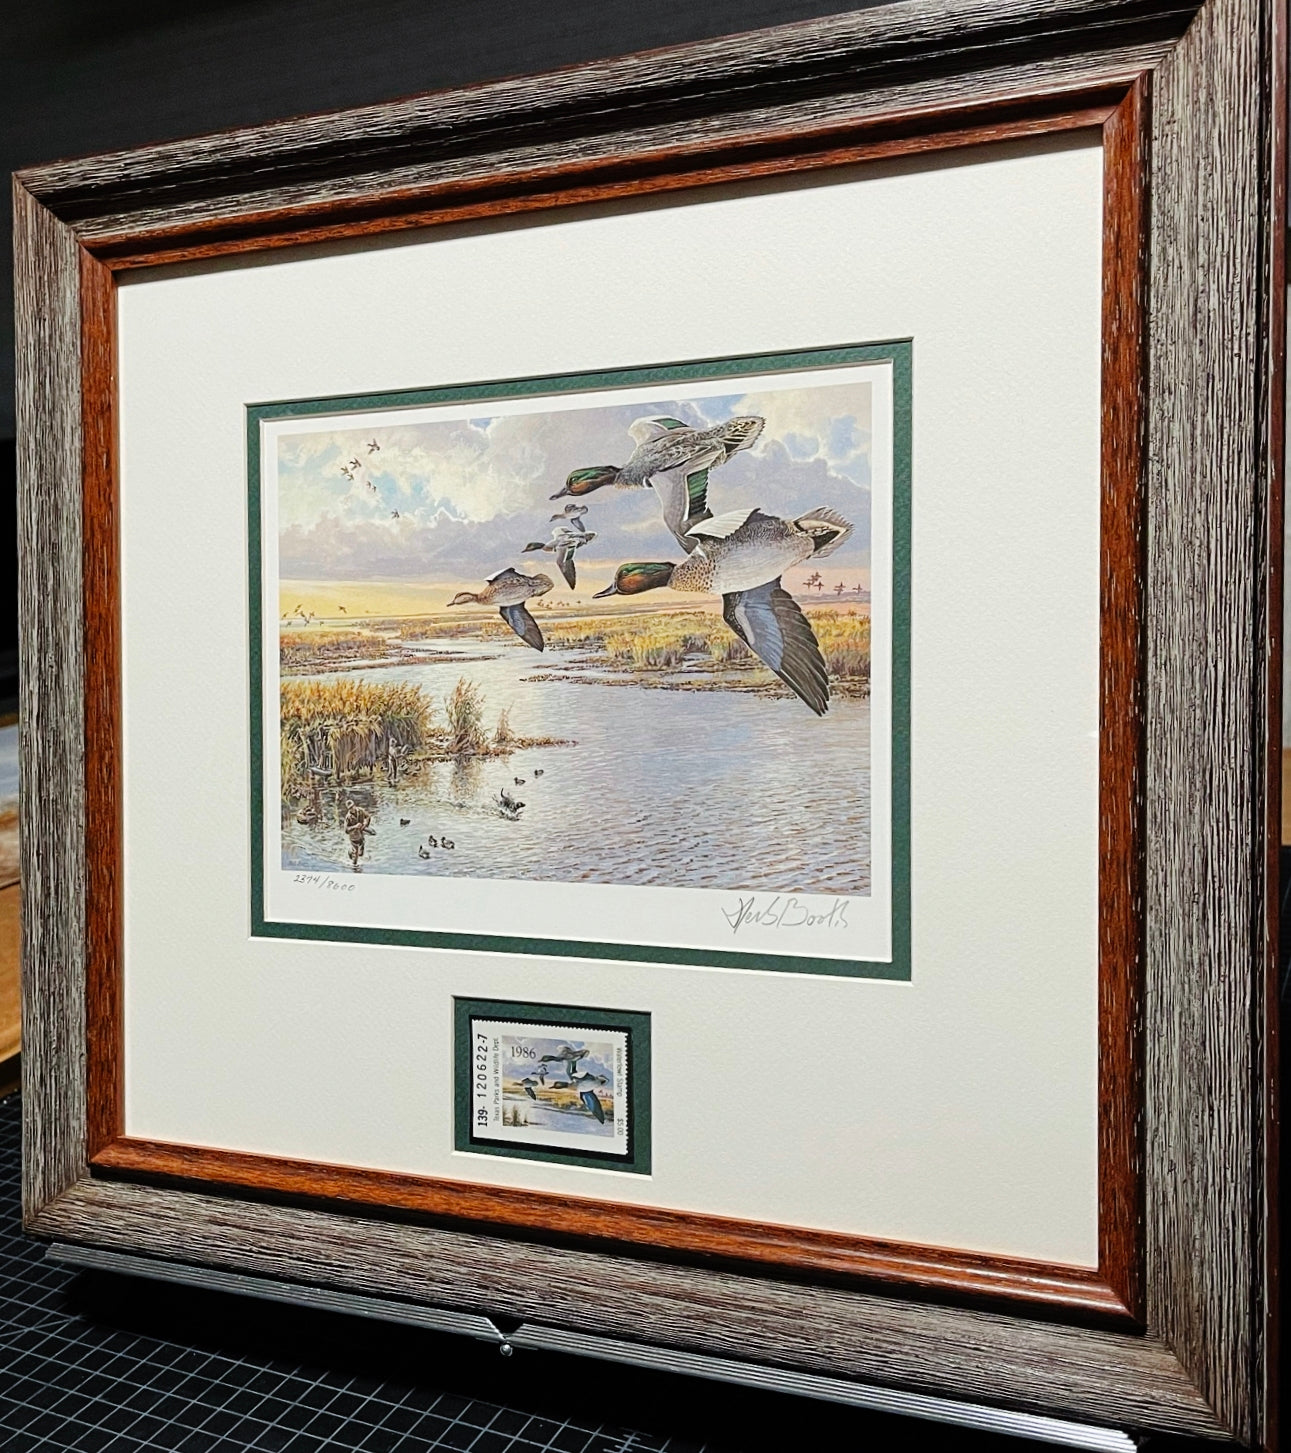 Herb Booth 1986 Texas Waterfowl Duck Stamp Print With Stamp - Brand New Custom Sporting Frame